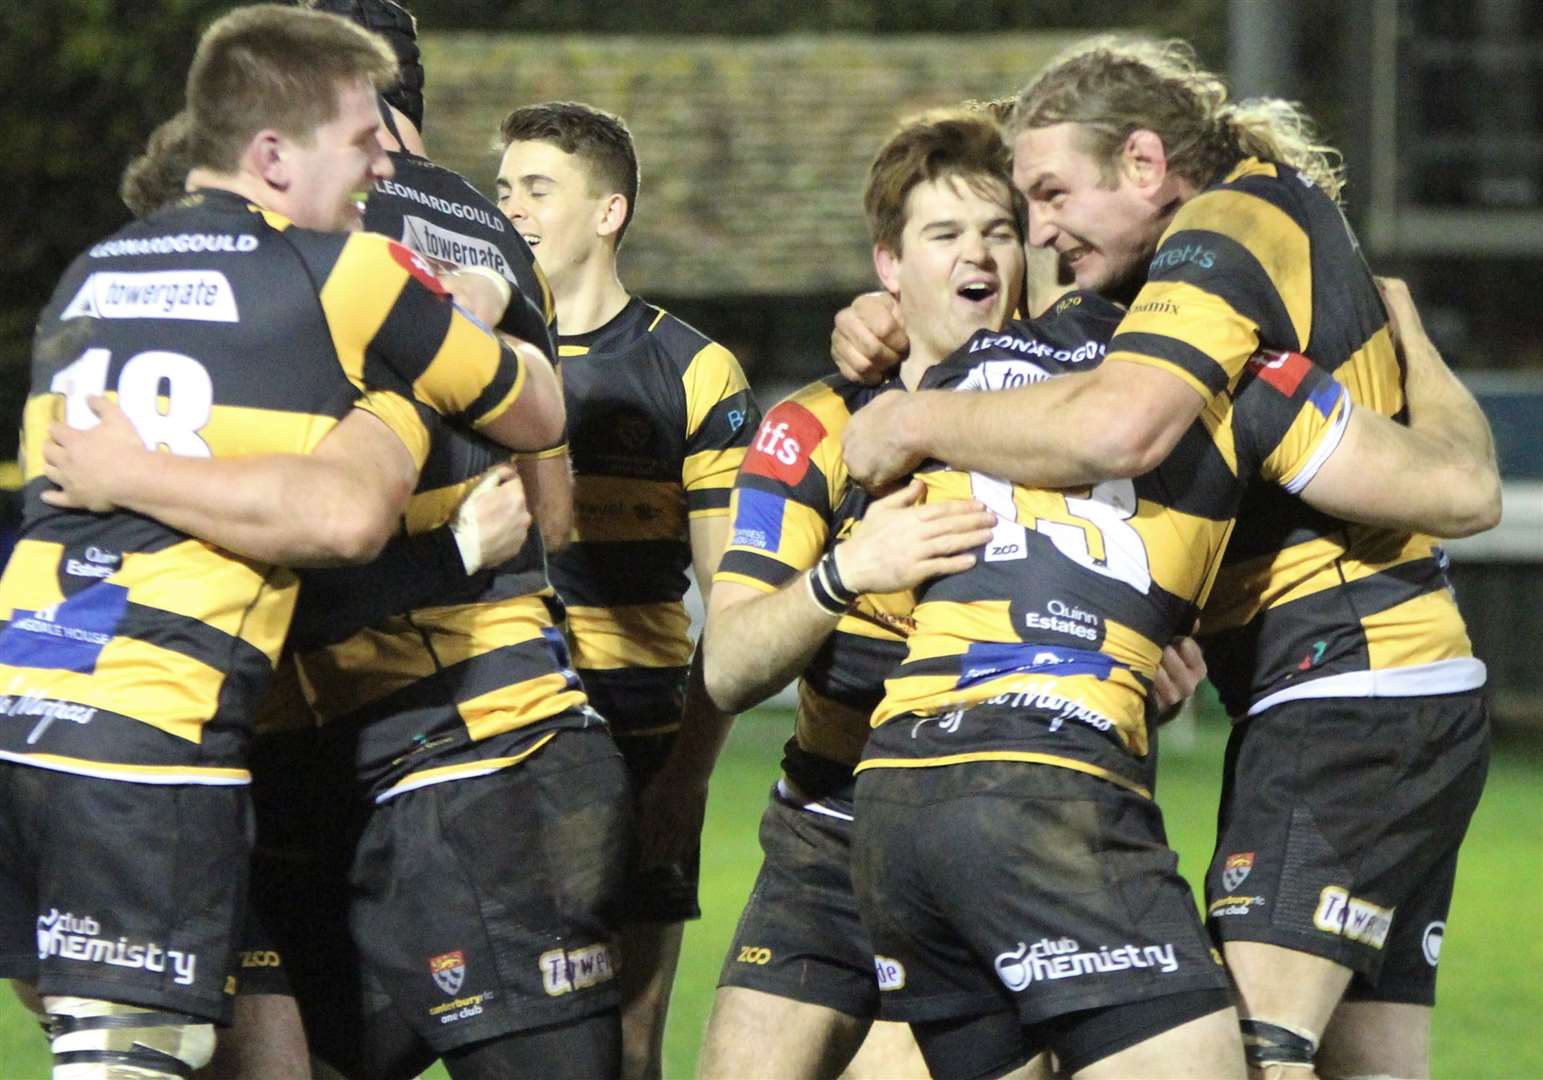 Canterbury's players celebrate their thrilling 19-17 win over Cinderford. Picture: Phillipa Hilton